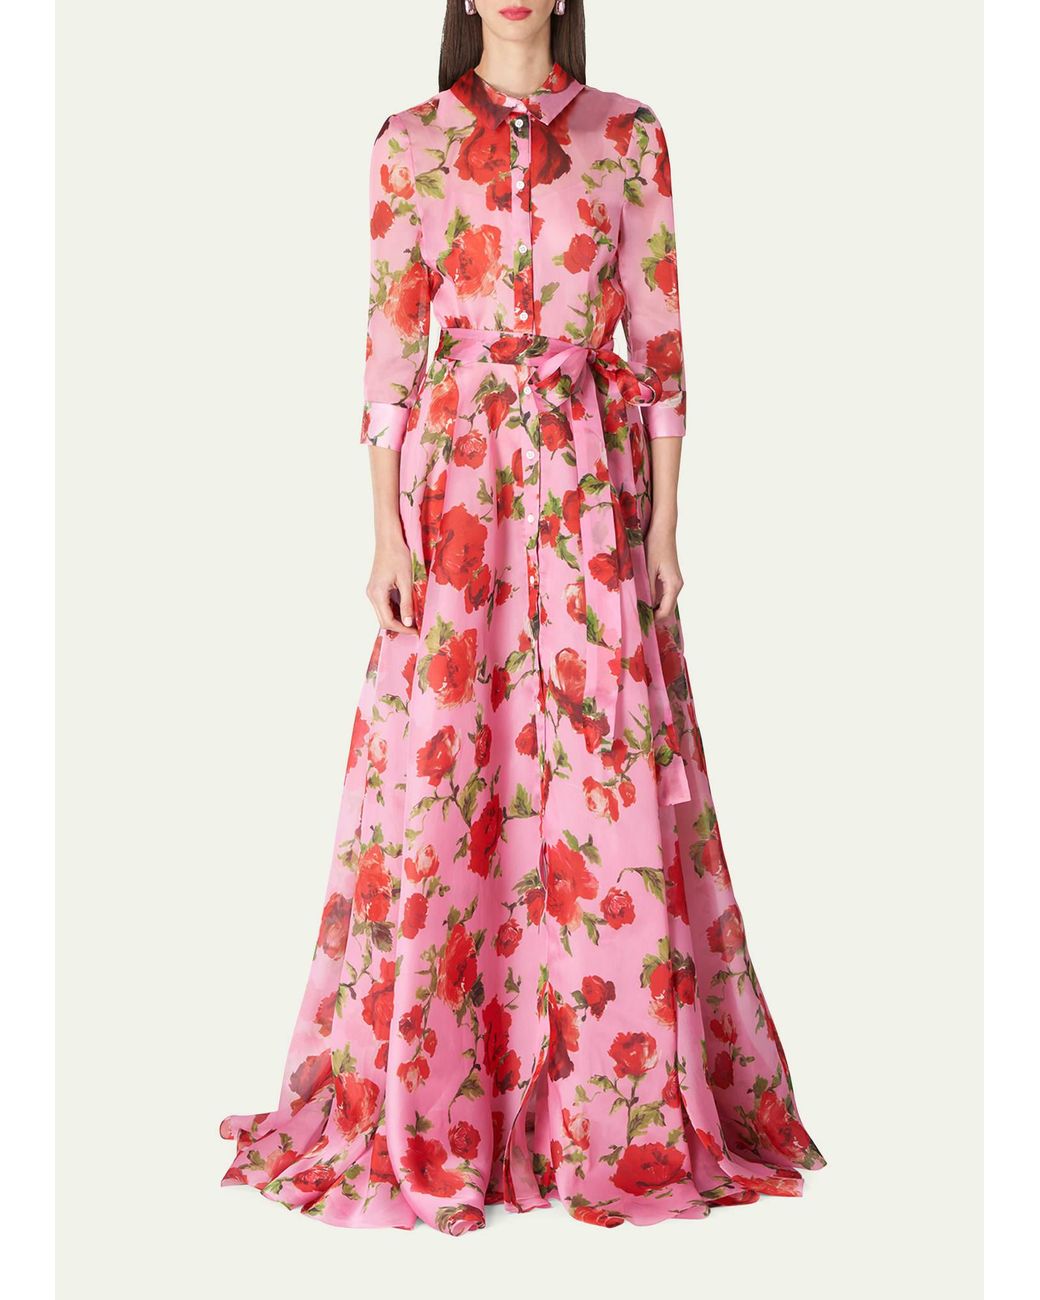 Carolina Herrera Floral Print Trench Gown With Tie Belt in Red | Lyst